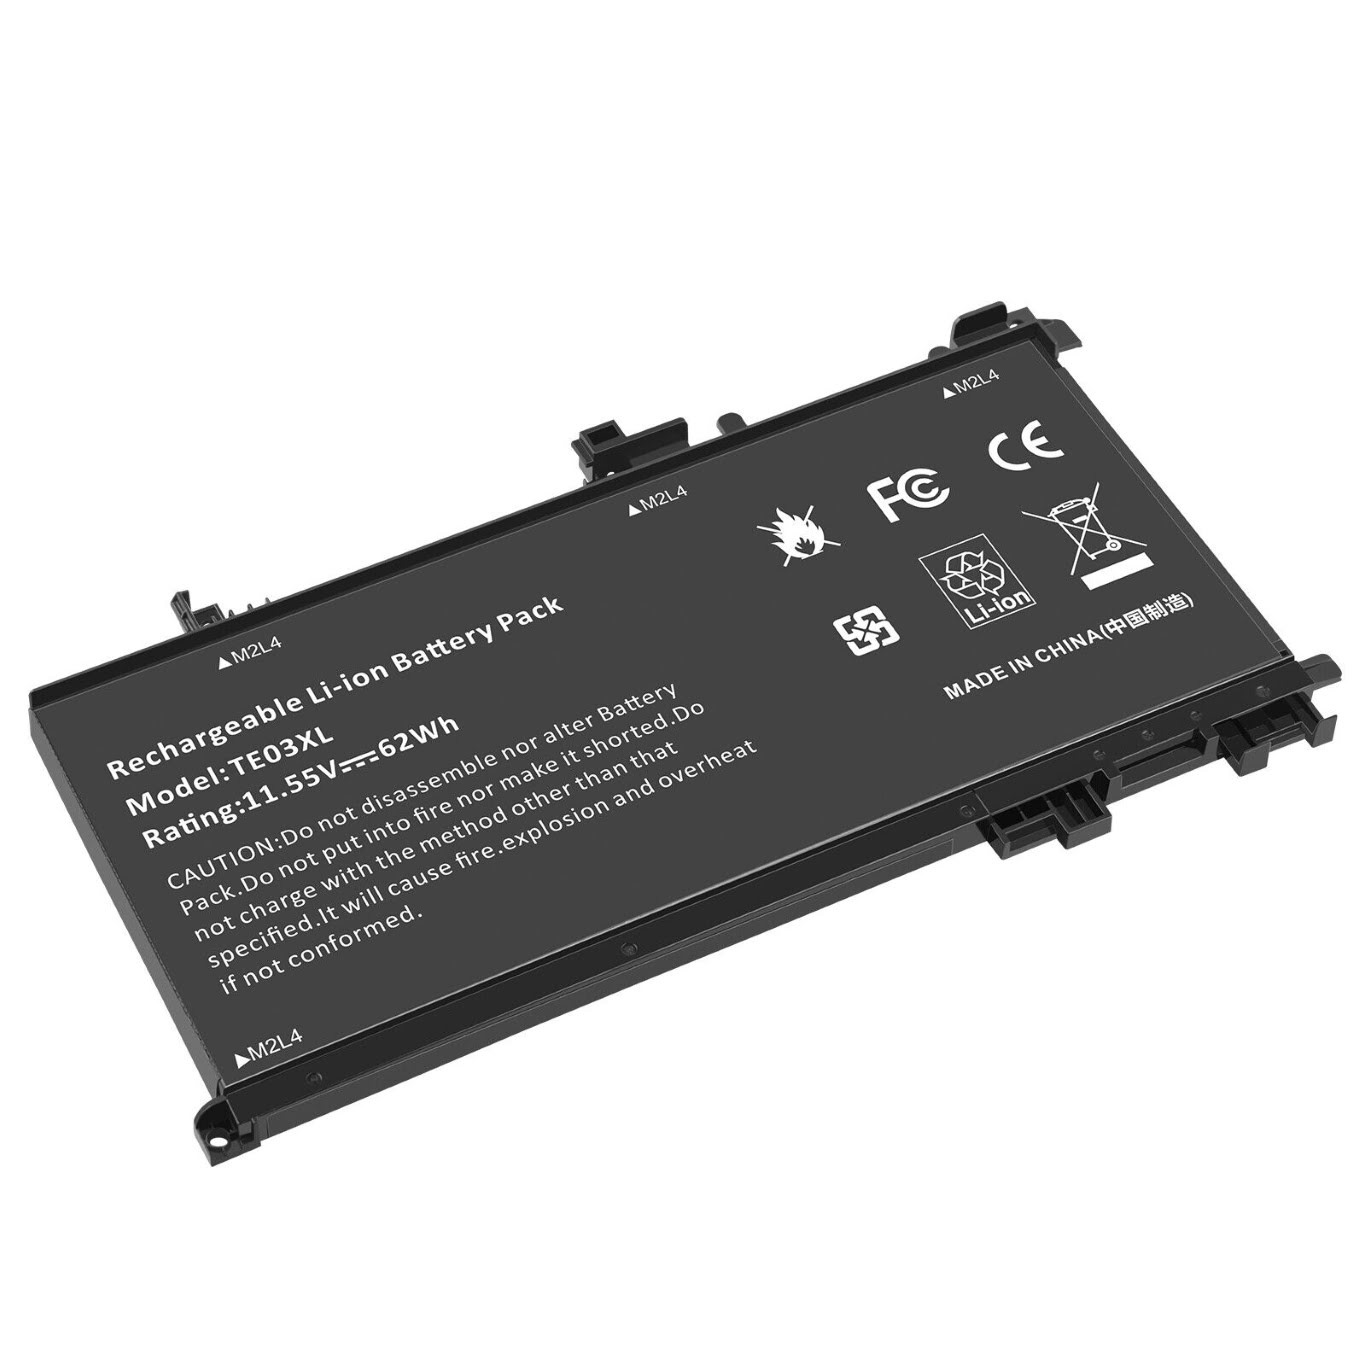 849570, 849570-541 replacement Laptop Battery for HP 15-ax015TX, 15-ax016TX, 3 cells, 11.55v, 62wh